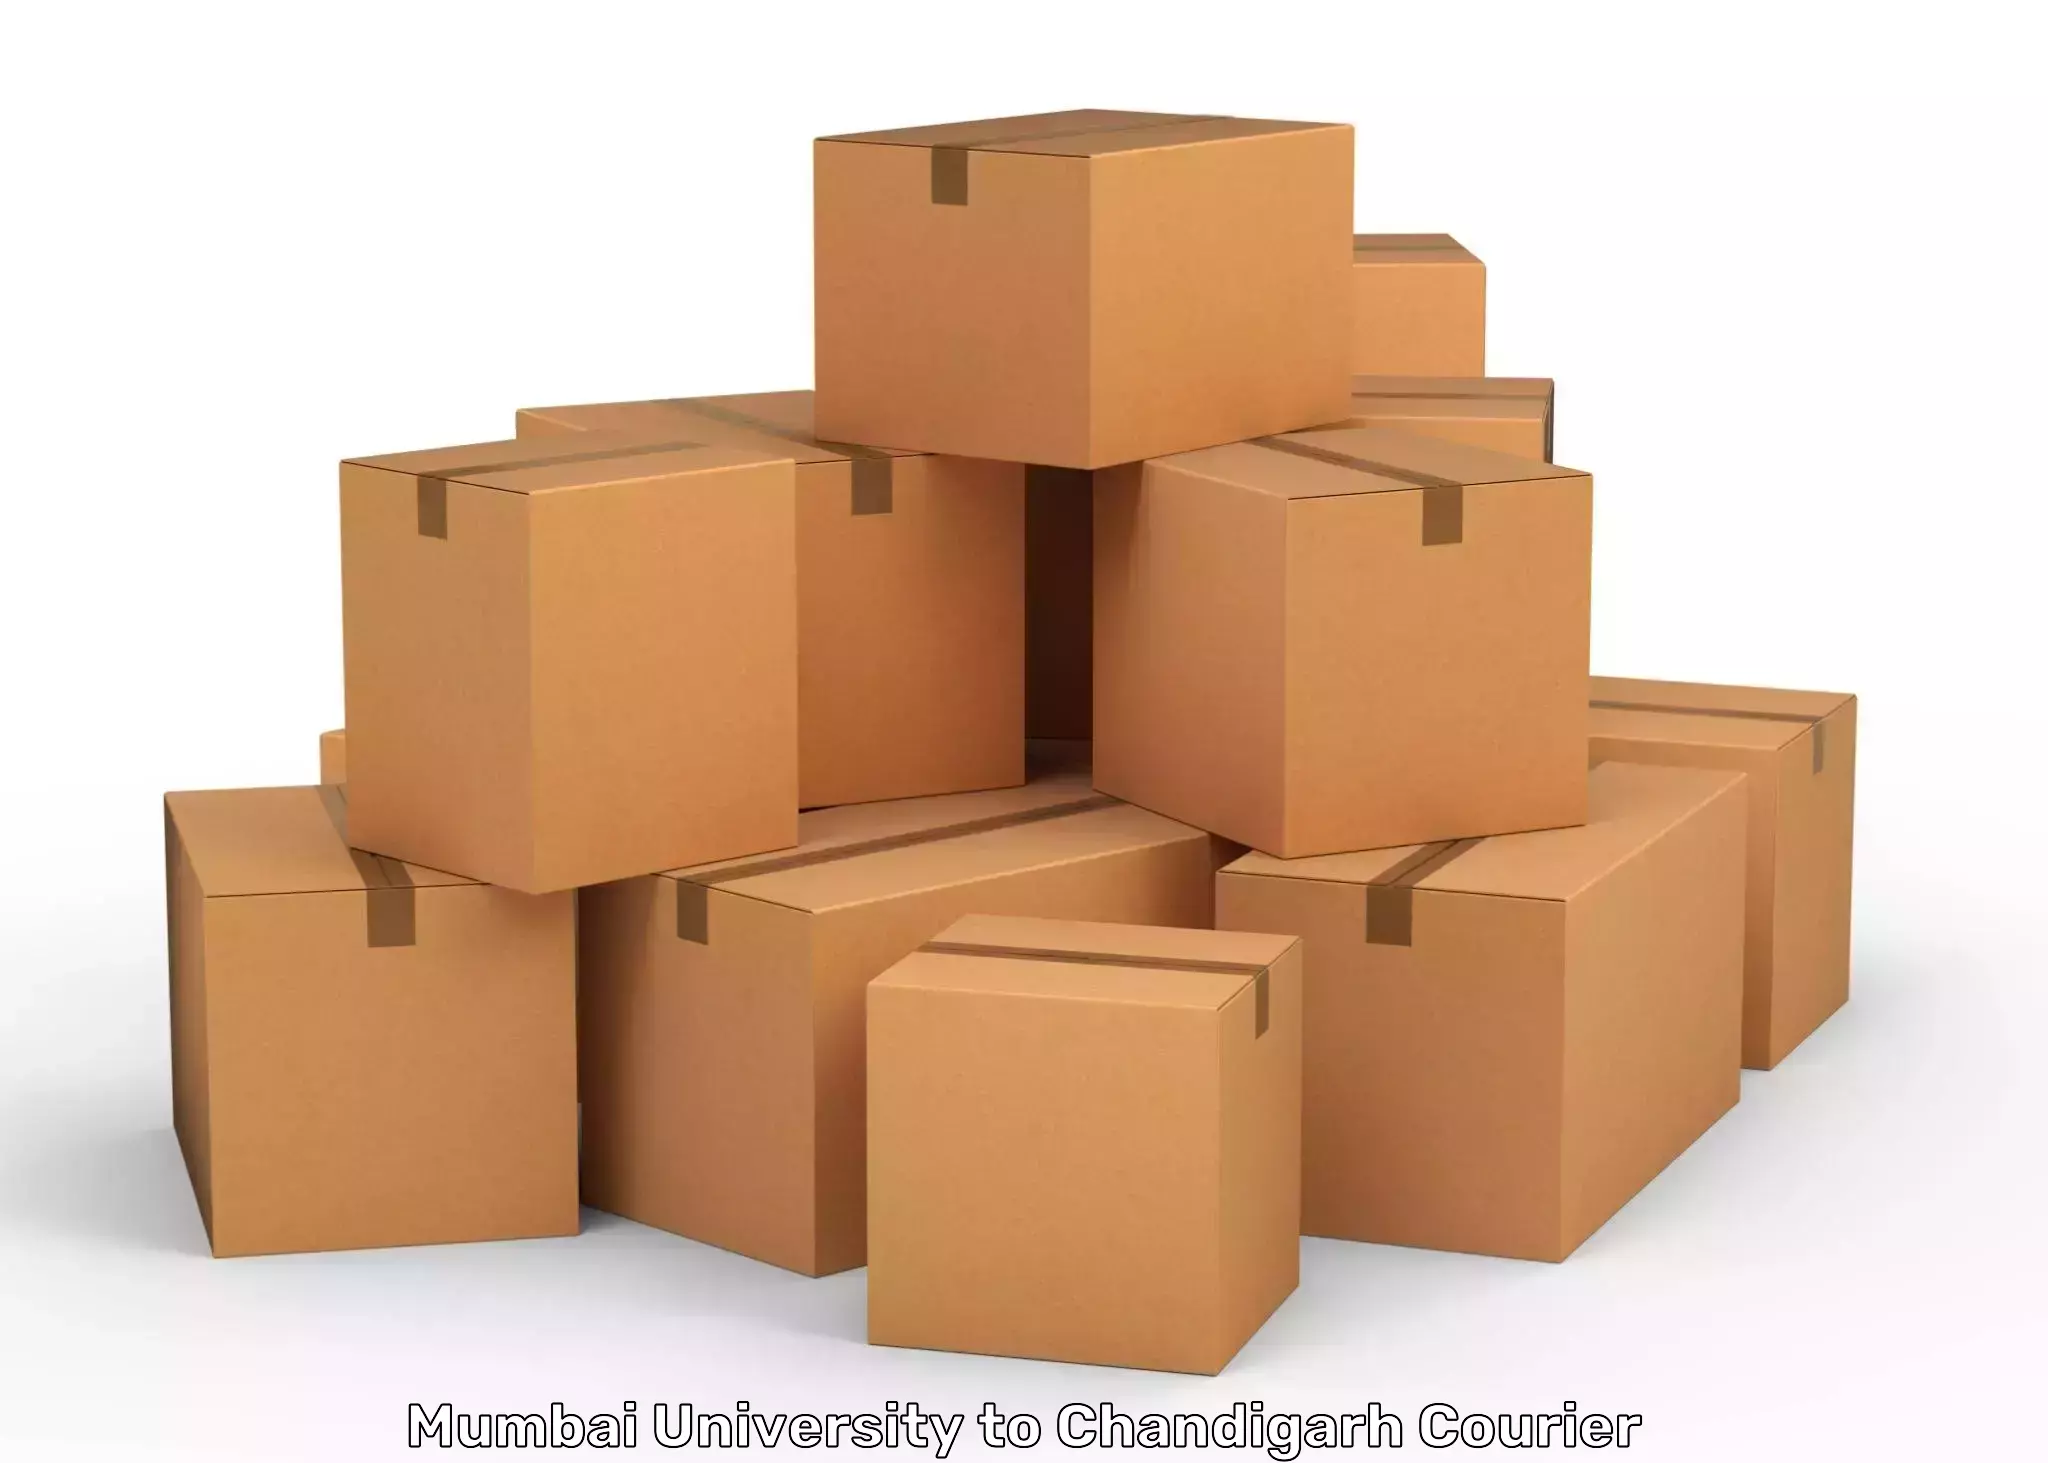 Courier dispatch services Mumbai University to Chandigarh